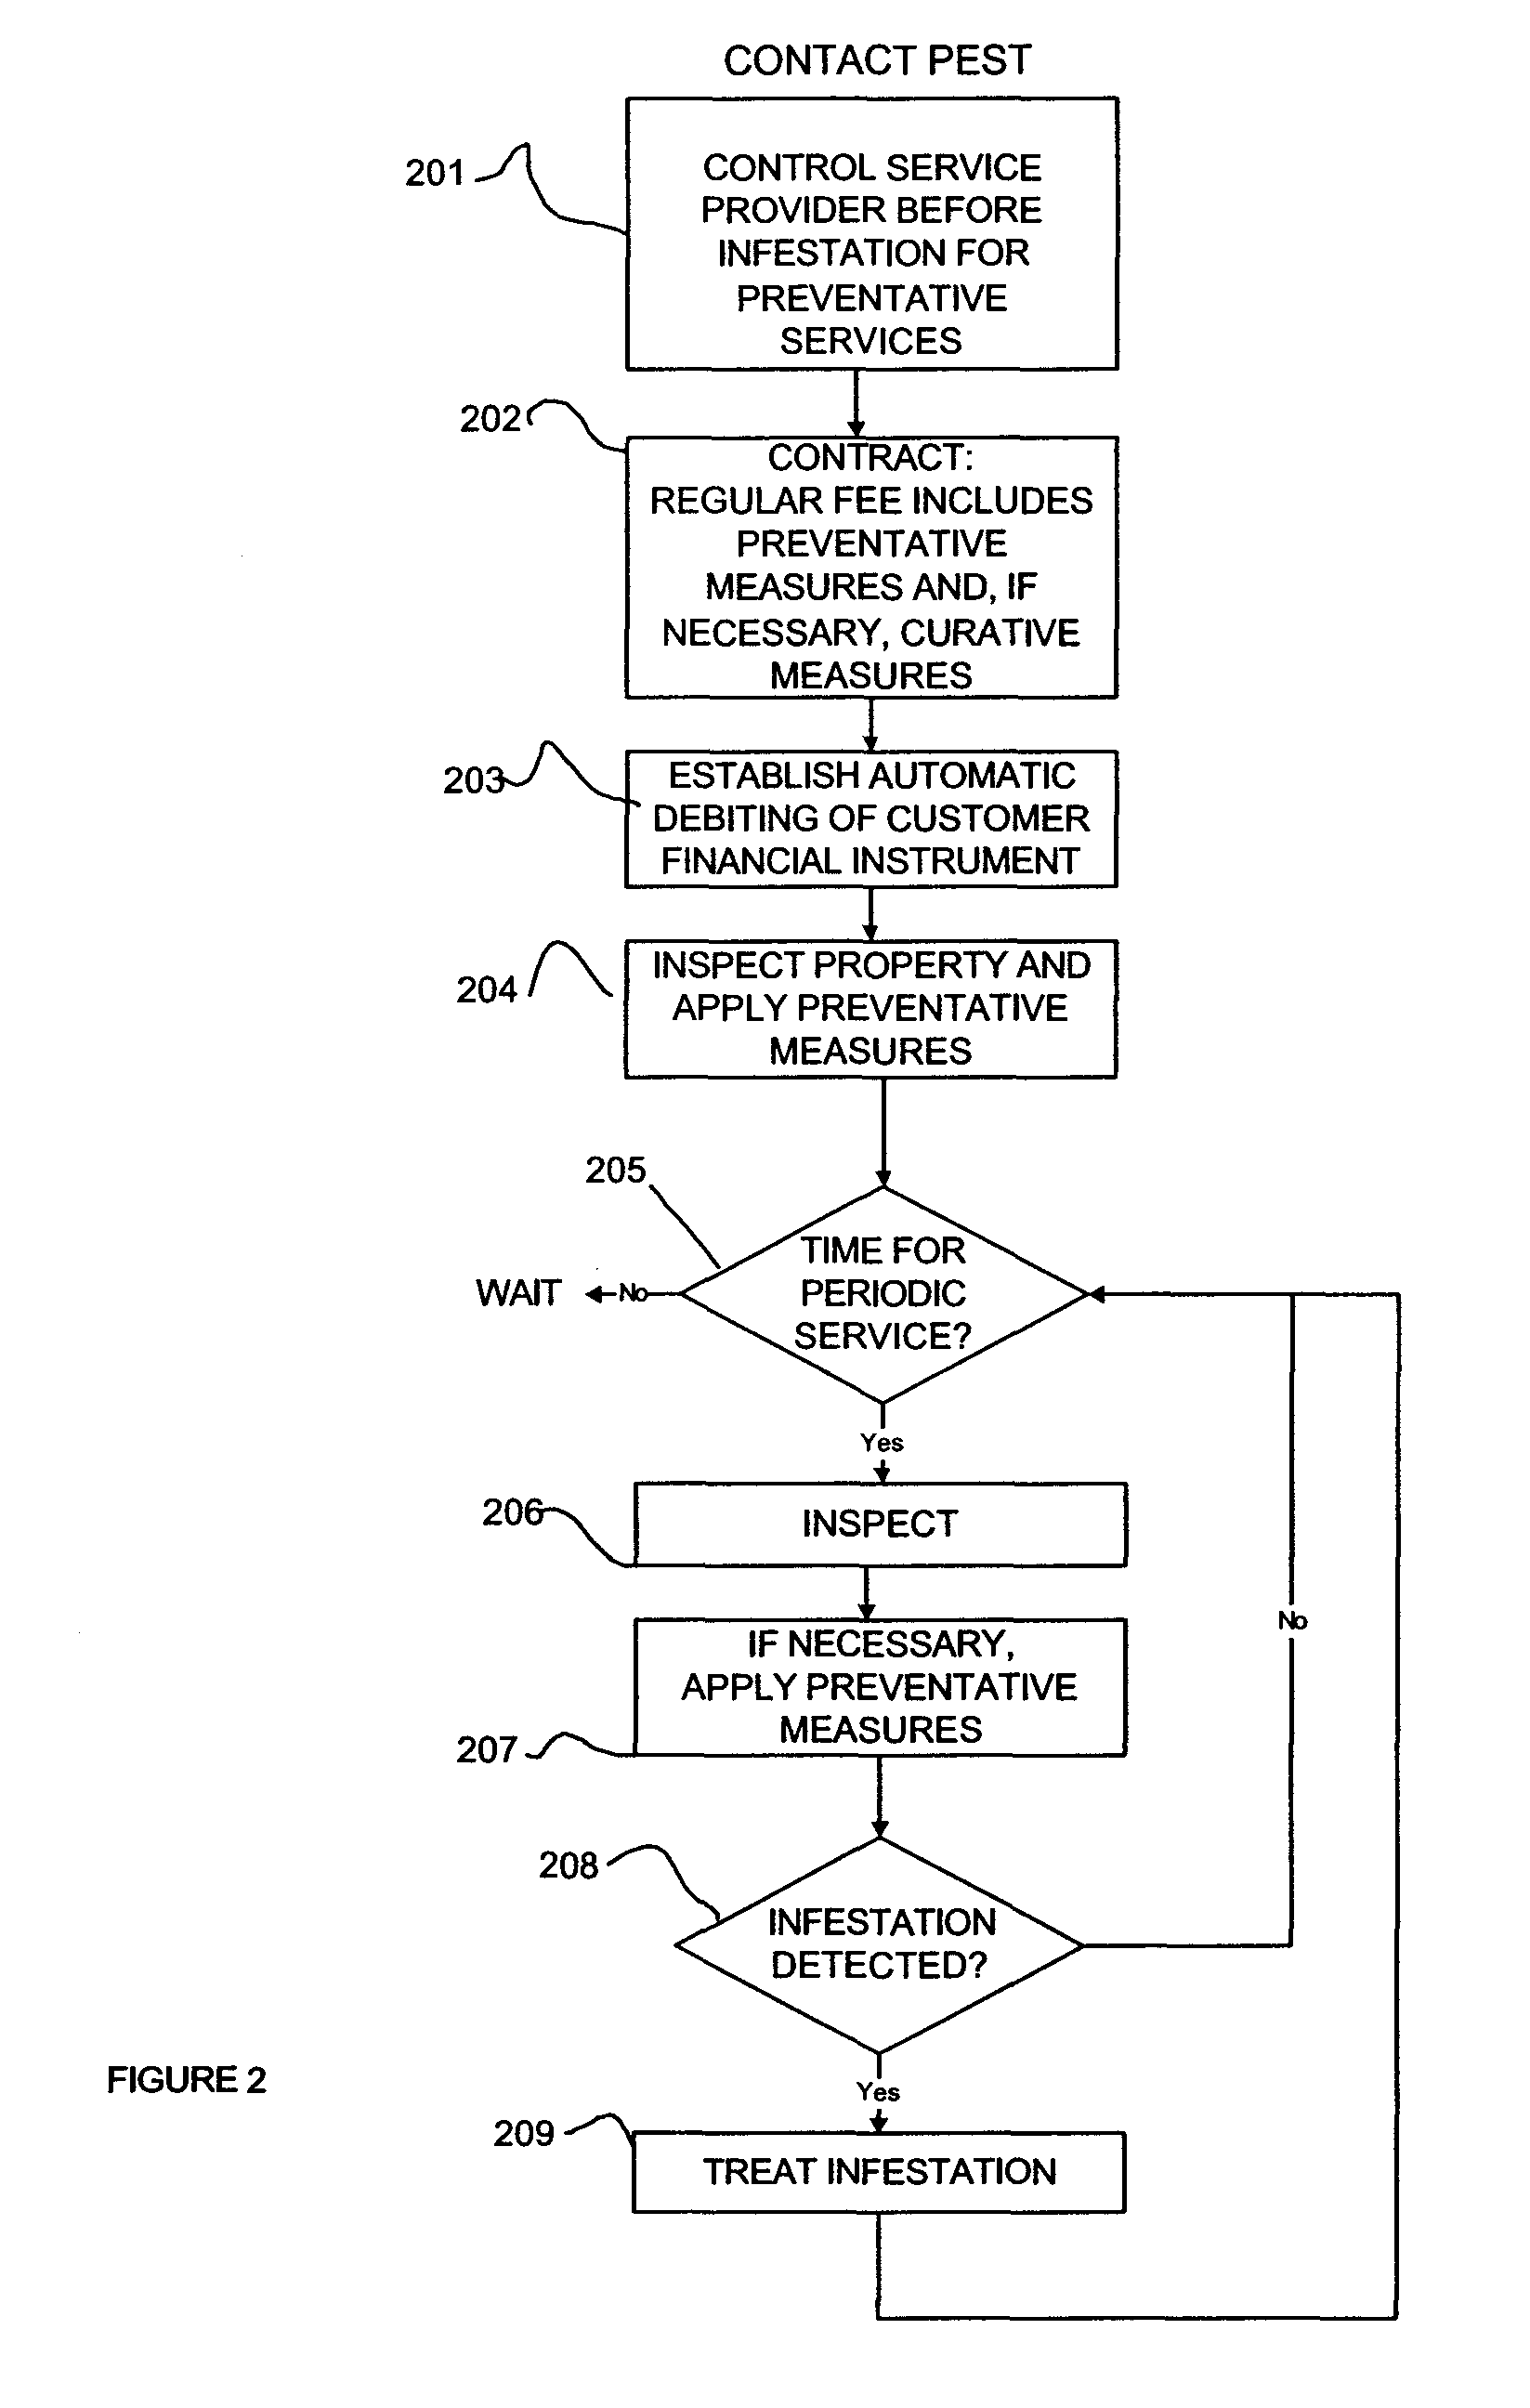 System and method for controlling pests